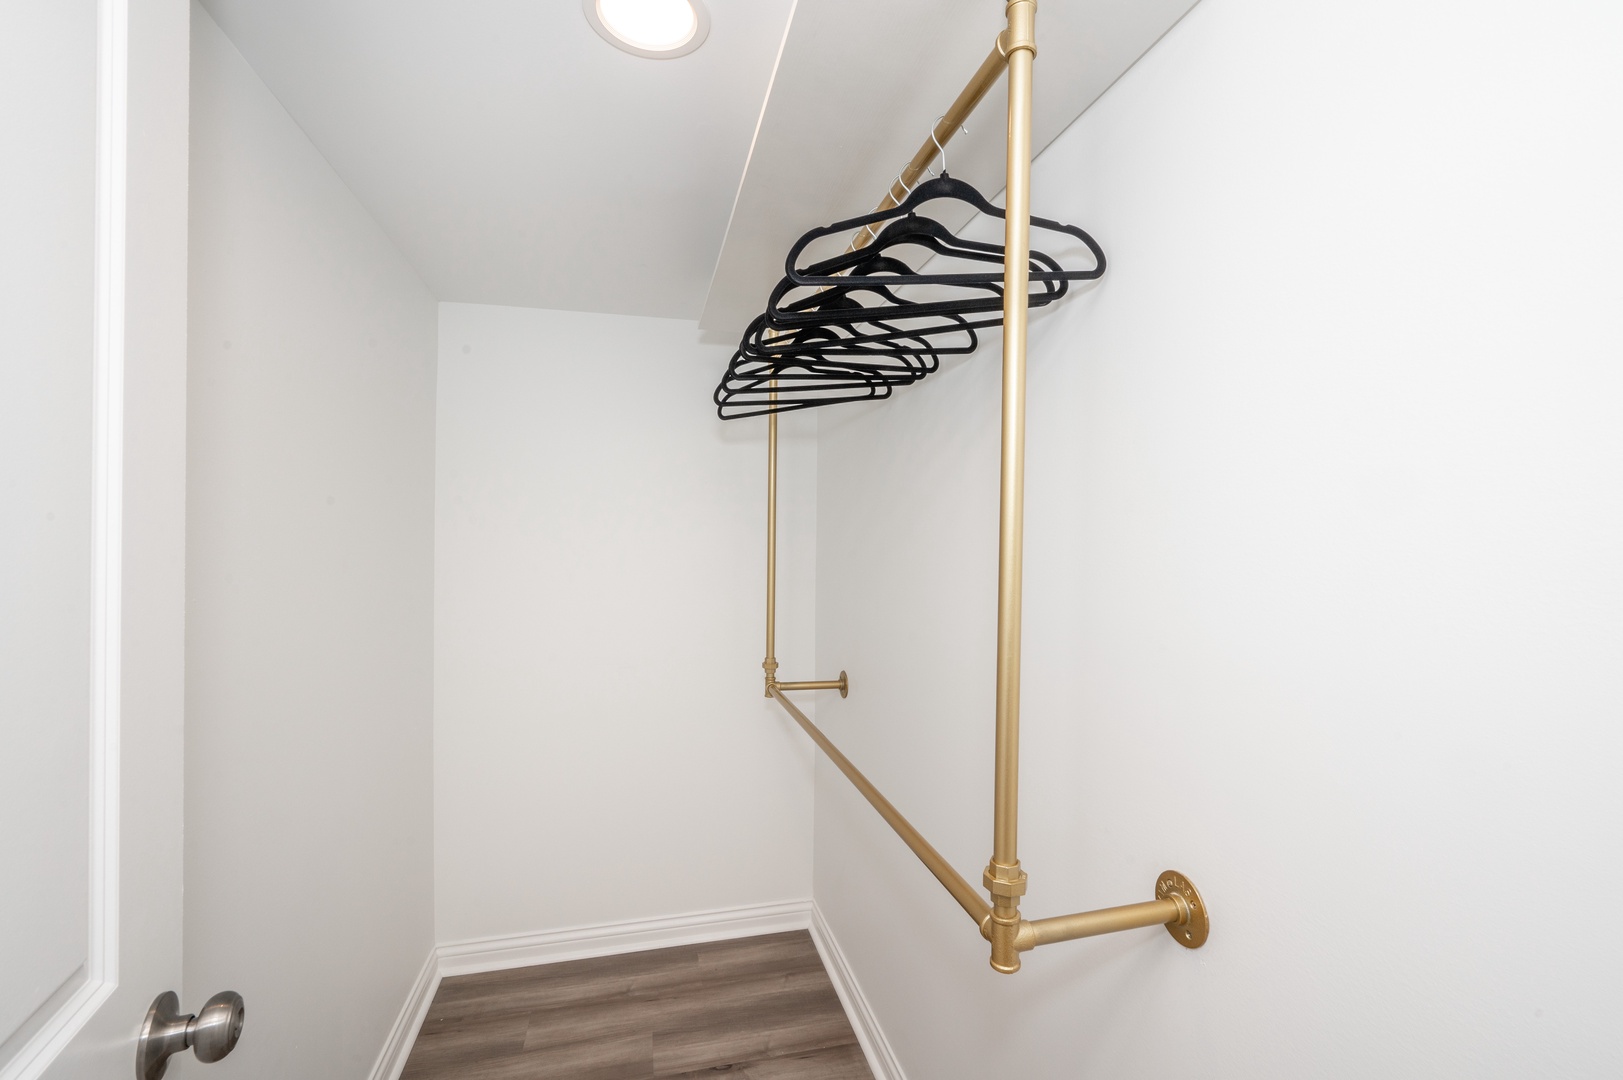 The bedroom closet offers plenty of space to keep bags and clothes neatly tucked away